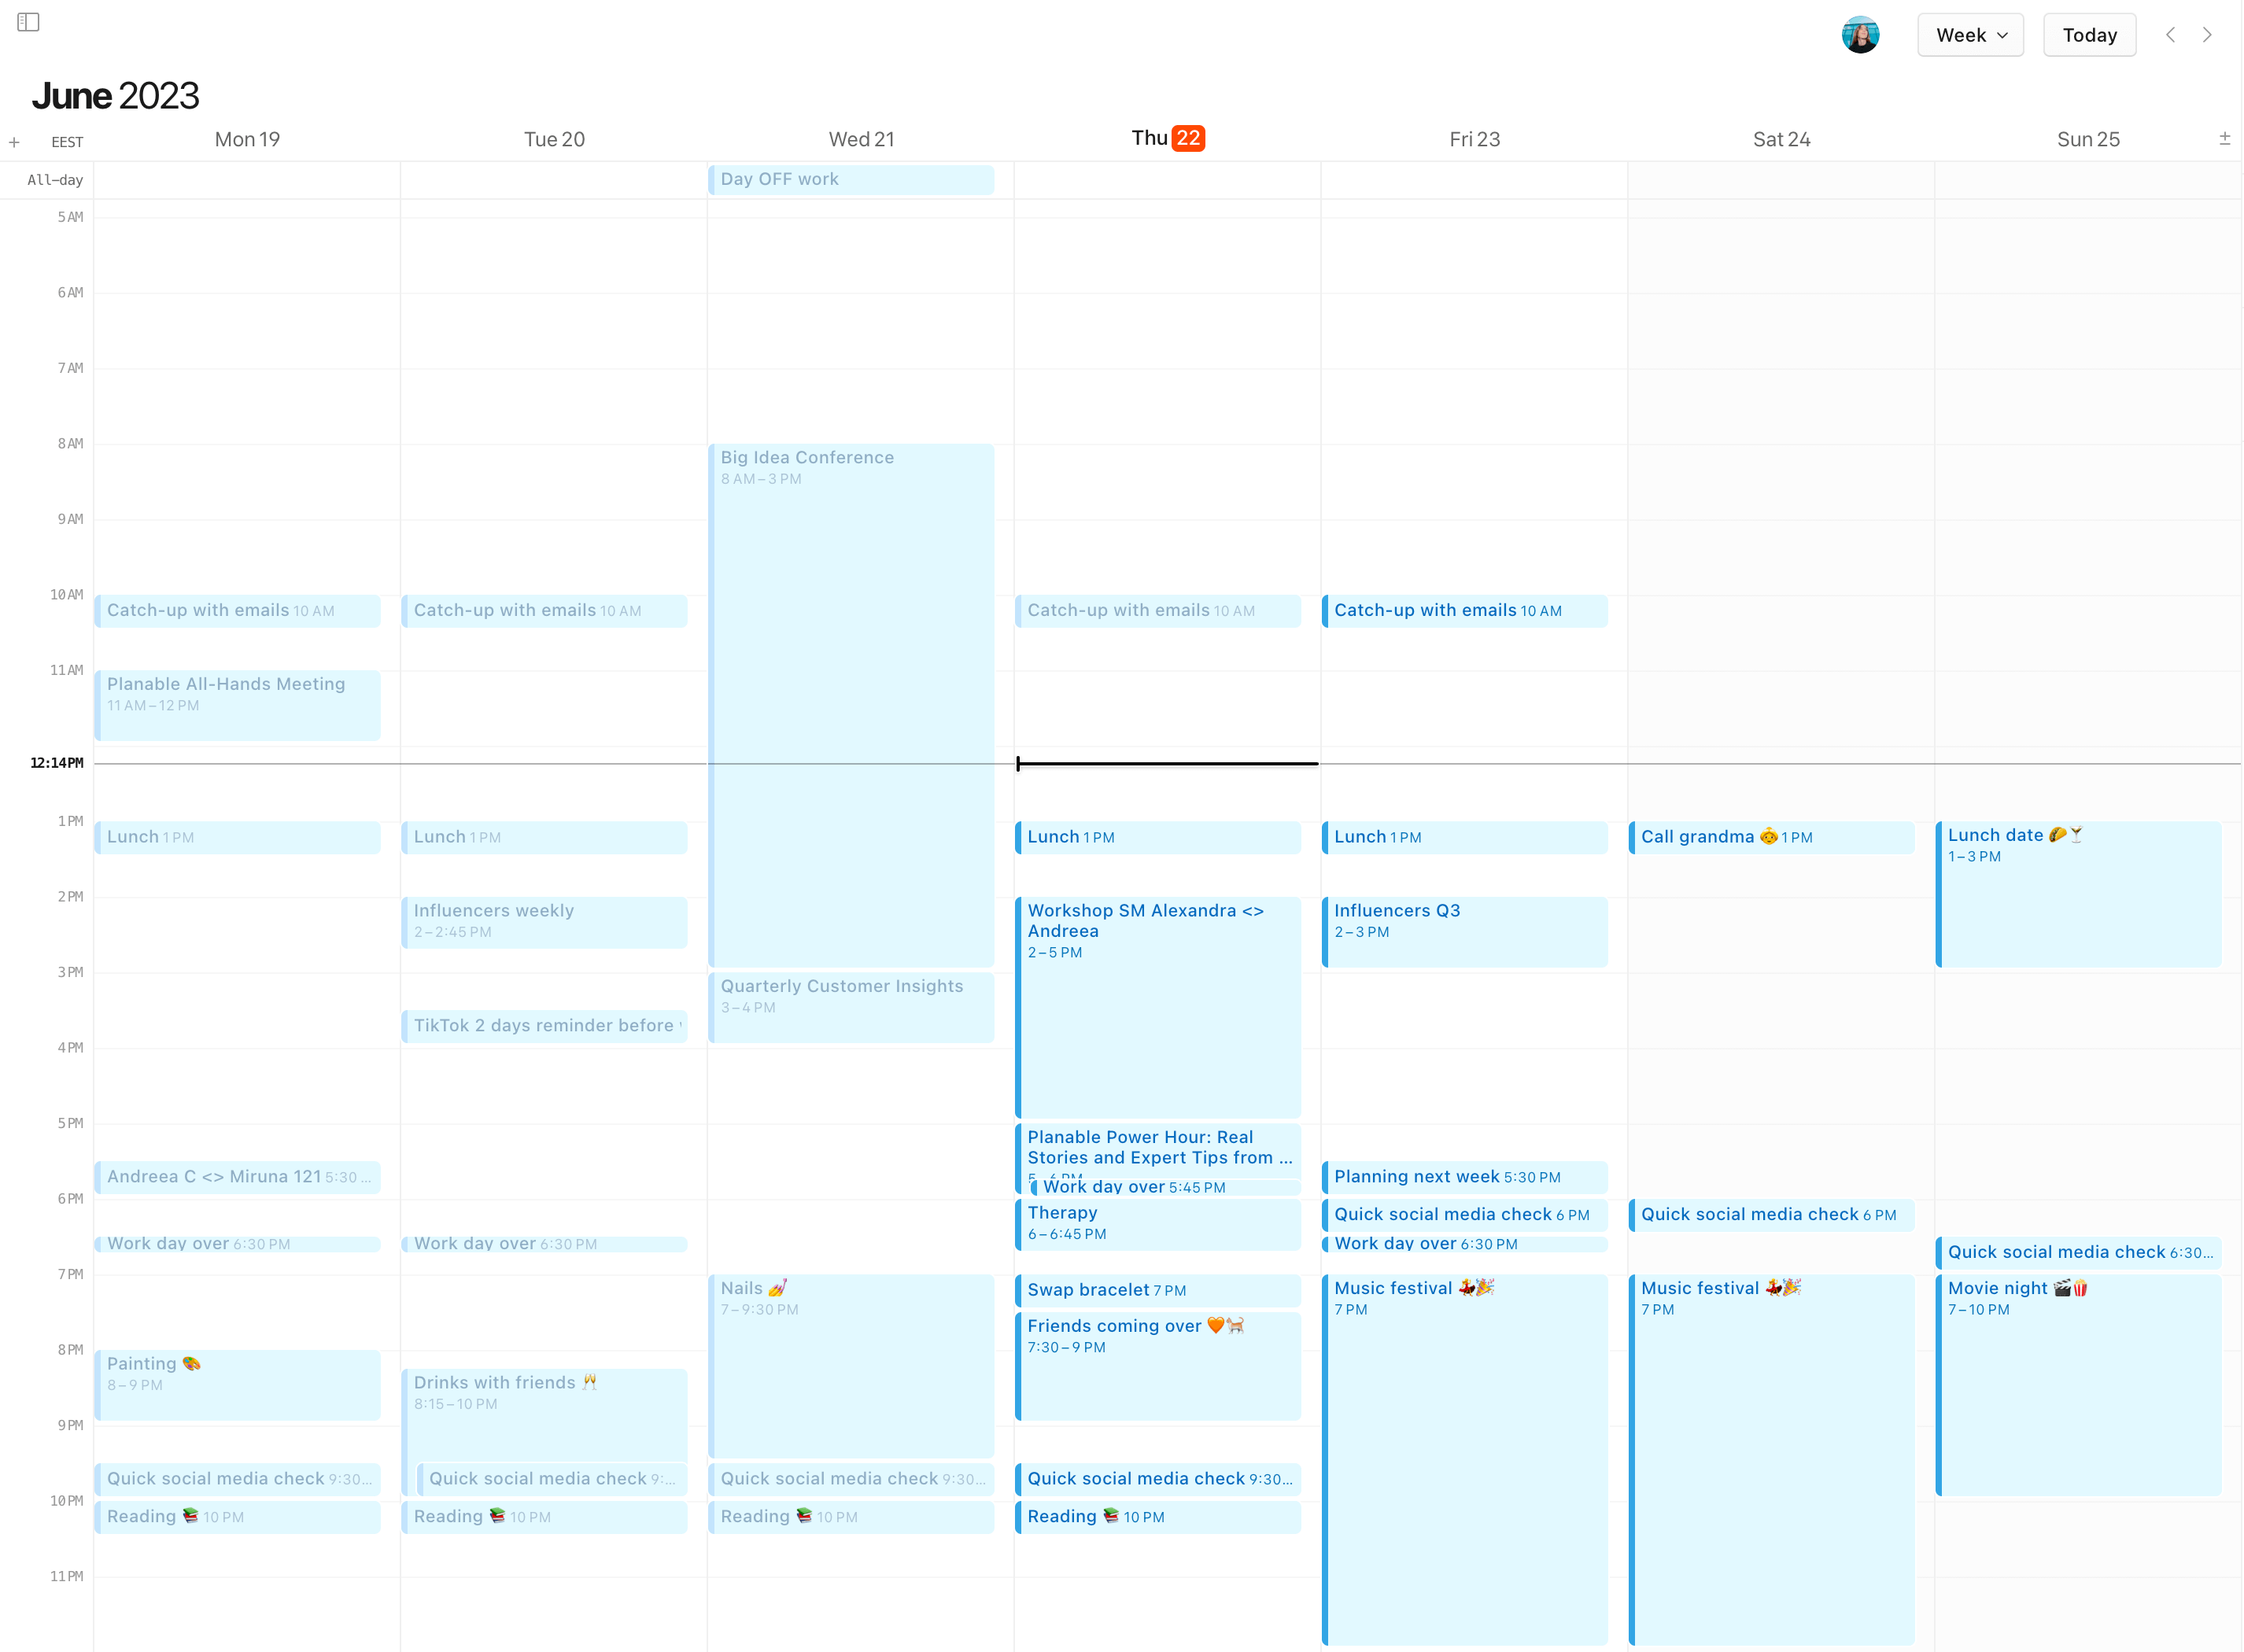 Andreea's personal calendar with time blocked both for work and personal events